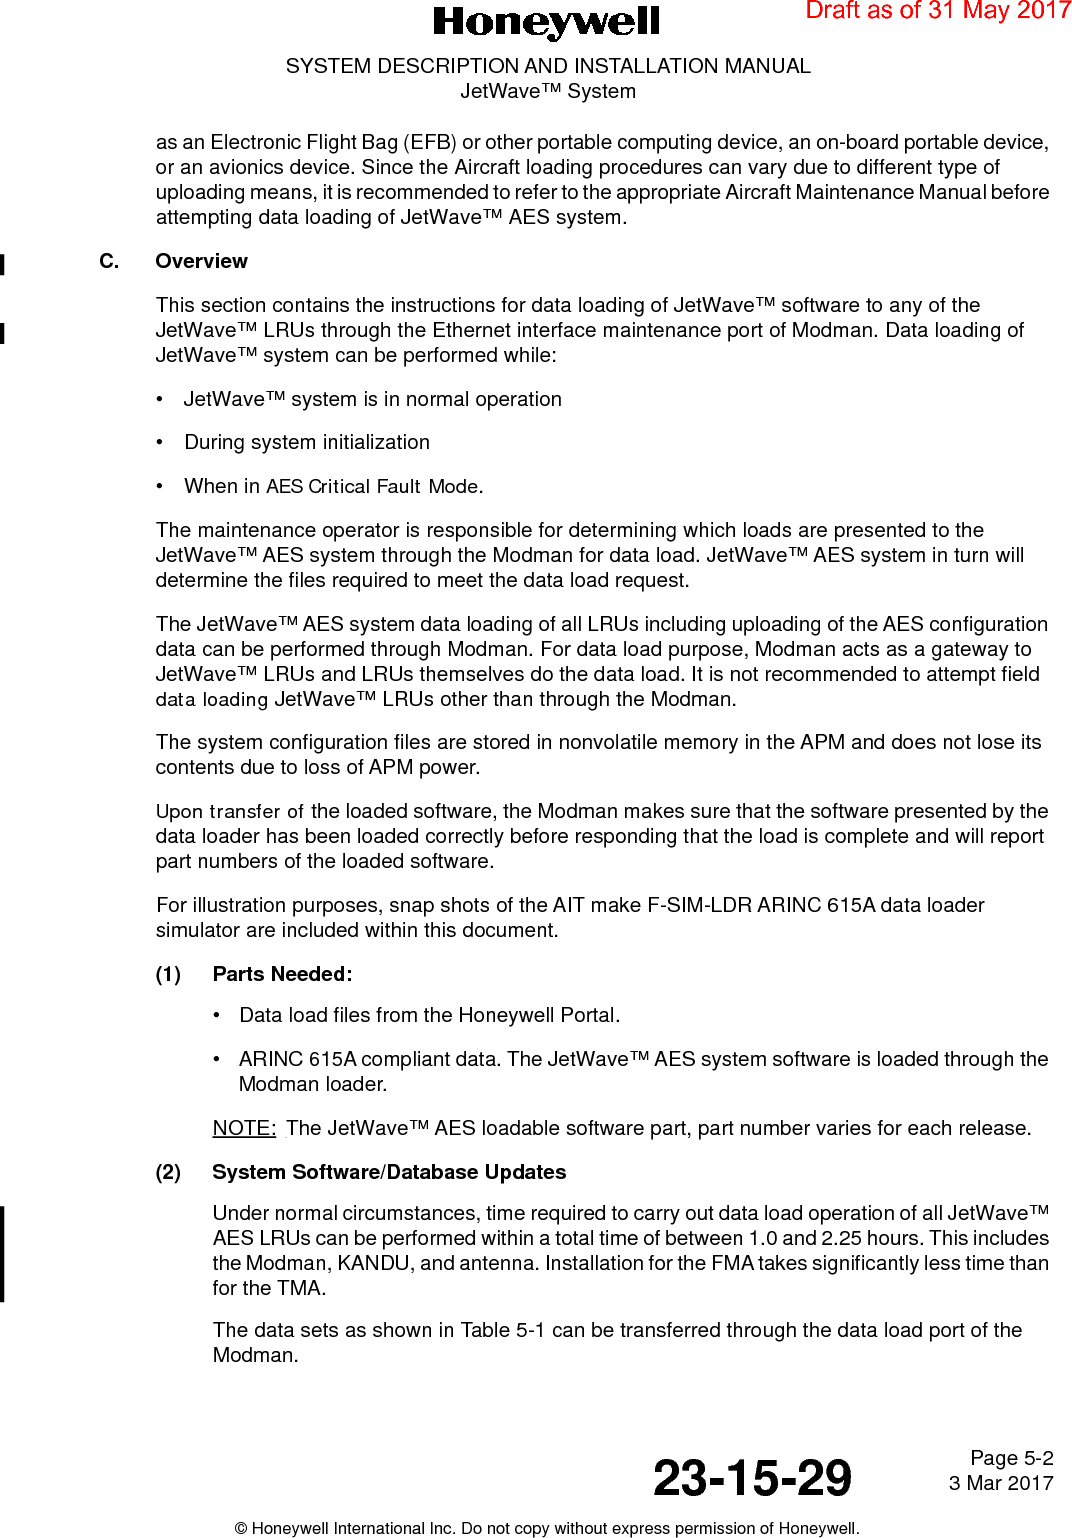 Page 5-2 3 Mar 201723-15-29SYSTEM DESCRIPTION AND INSTALLATION MANUALJetWave™ System© Honeywell International Inc. Do not copy without express permission of Honeywell.as an Electronic Flight Bag (EFB) or other portable computing device, an on-board portable device, or an avionics device. Since the Aircraft loading procedures can vary due to different type of uploading means, it is recommended to refer to the appropriate Aircraft Maintenance Manual before attempting data loading of JetWave™ AES system. C. OverviewThis section contains the instructions for data loading of JetWave™ software to any of the JetWave™ LRUs through the Ethernet interface maintenance port of Modman. Data loading of JetWave™ system can be performed while:• JetWave™ system is in normal operation  • During system initialization • When in AES Critical Fault Mode. The maintenance operator is responsible for determining which loads are presented to the JetWave™ AES system through the Modman for data load. JetWave™ AES system in turn will determine the files required to meet the data load request. The JetWave™ AES system data loading of all LRUs including uploading of the AES configuration data can be performed through Modman. For data load purpose, Modman acts as a gateway to JetWave™ LRUs and LRUs themselves do the data load. It is not recommended to attempt field data loading JetWave™ LRUs other than through the Modman. The system configuration files are stored in nonvolatile memory in the APM and does not lose its contents due to loss of APM power. Upon transfer of the loaded software, the Modman makes sure that the software presented by the data loader has been loaded correctly before responding that the load is complete and will report part numbers of the loaded software. For illustration purposes, snap shots of the AIT make F-SIM-LDR ARINC 615A data loader simulator are included within this document. (1) Parts Needed:•Data load files from the Honeywell Portal. •ARINC 615A compliant data. The JetWave™ AES system software is loaded through the Modman loader. NOTE: The JetWave™ AES loadable software part, part number varies for each release. (2) System Software/Database UpdatesUnder normal circumstances, time required to carry out data load operation of all JetWave™ AES LRUs can be performed within a total time of between 1.0 and 2.25 hours. This includes the Modman, KANDU, and antenna. Installation for the FMA takes significantly less time than for the TMA.The data sets as shown in Table 5-1 can be transferred through the data load port of the Modman.Draft as of 31 May 2017